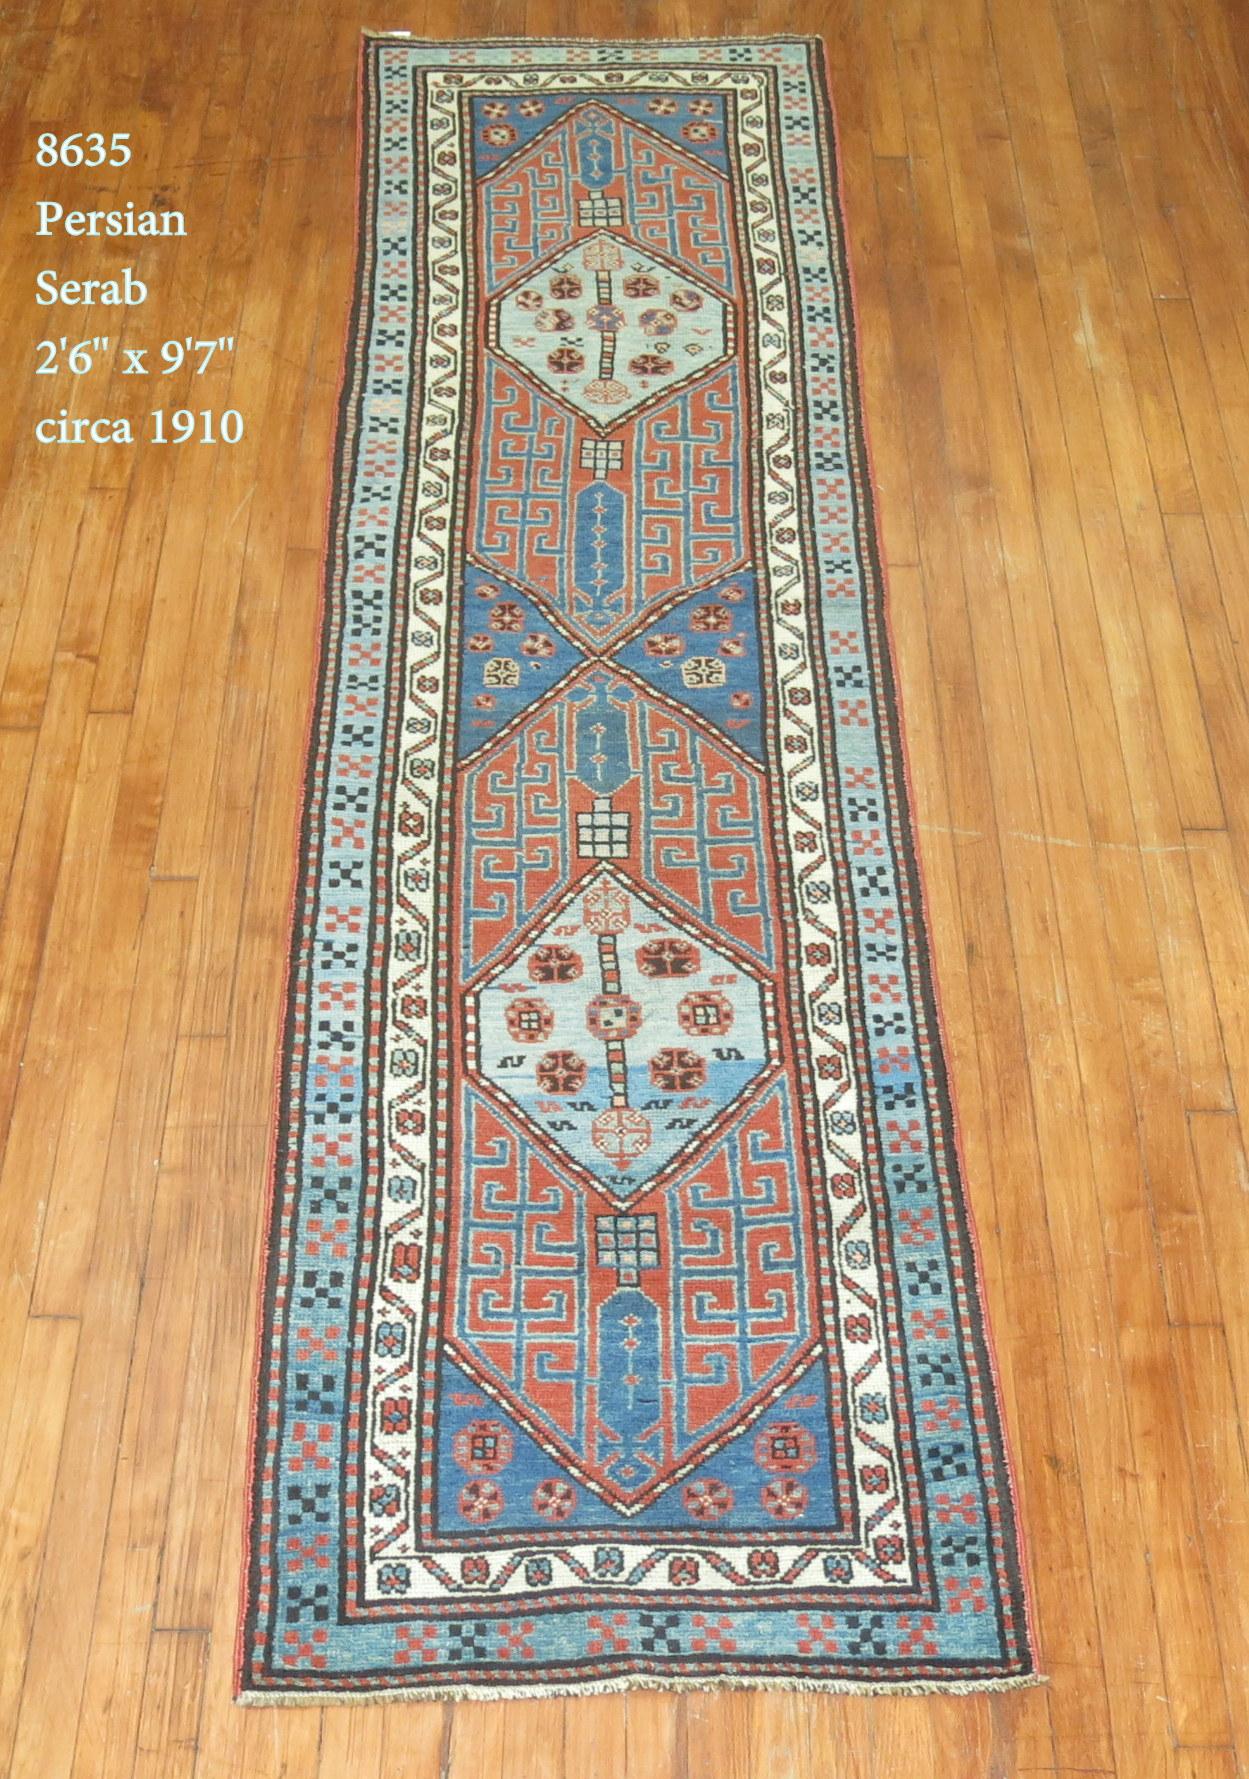 An early 20th century tribal one of a kind decorative Persian Serab runner.